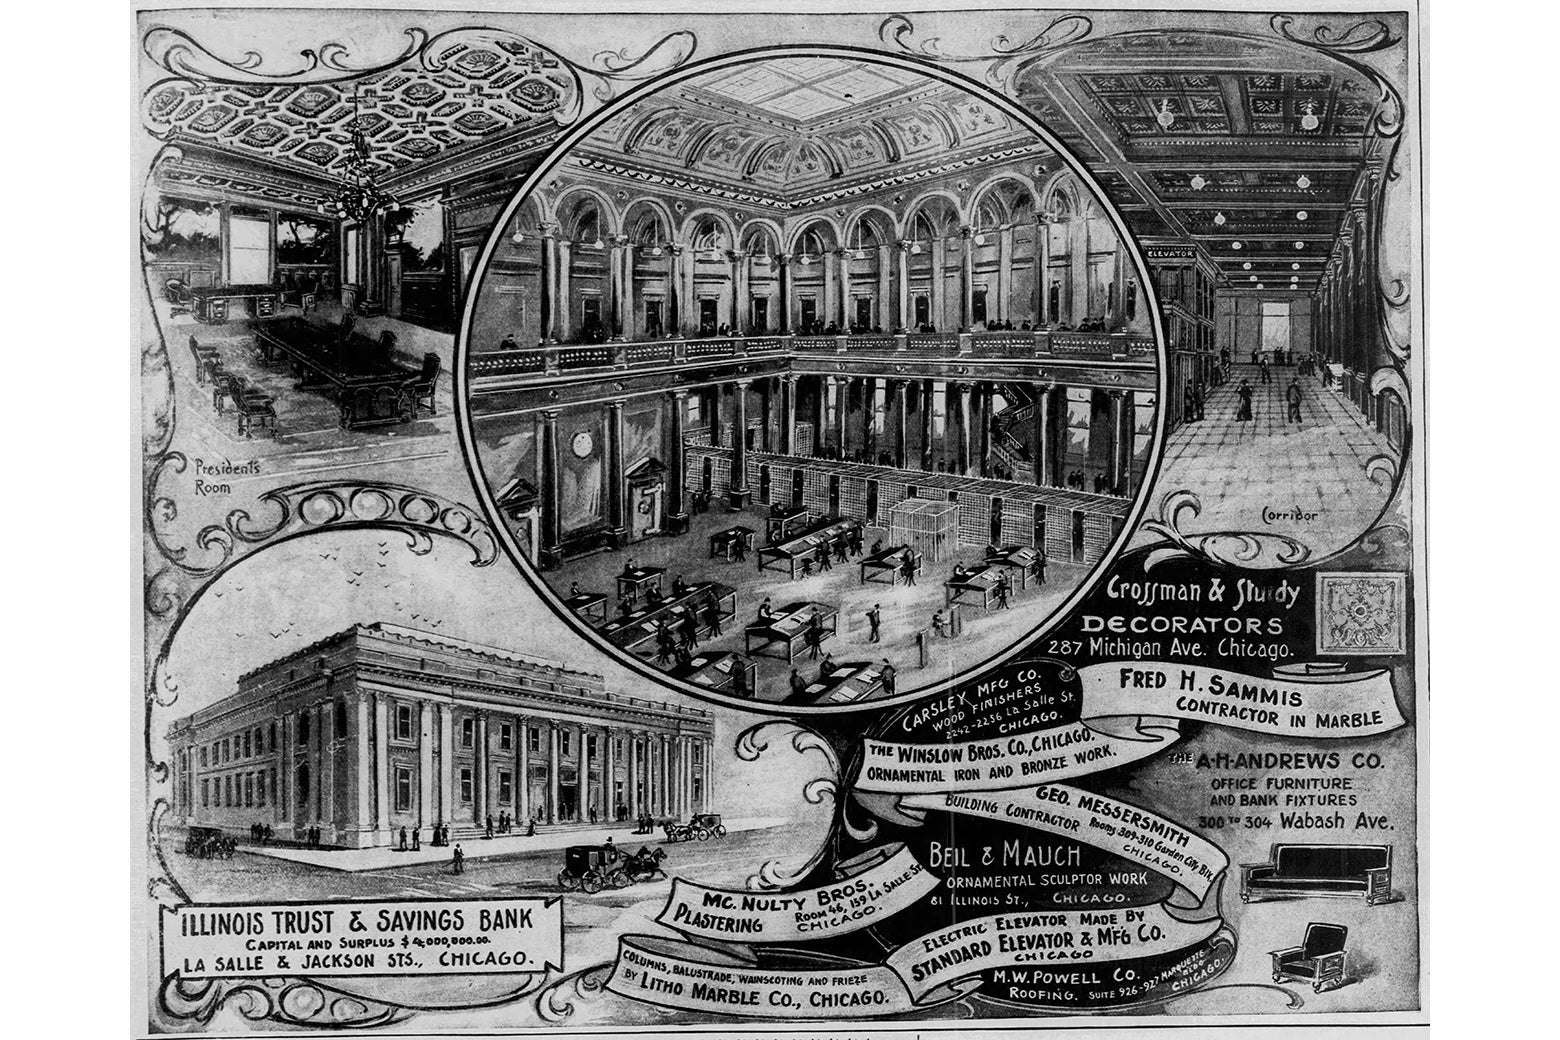 A newspaper illustration of the bank's interior, showing an enormous lobby.